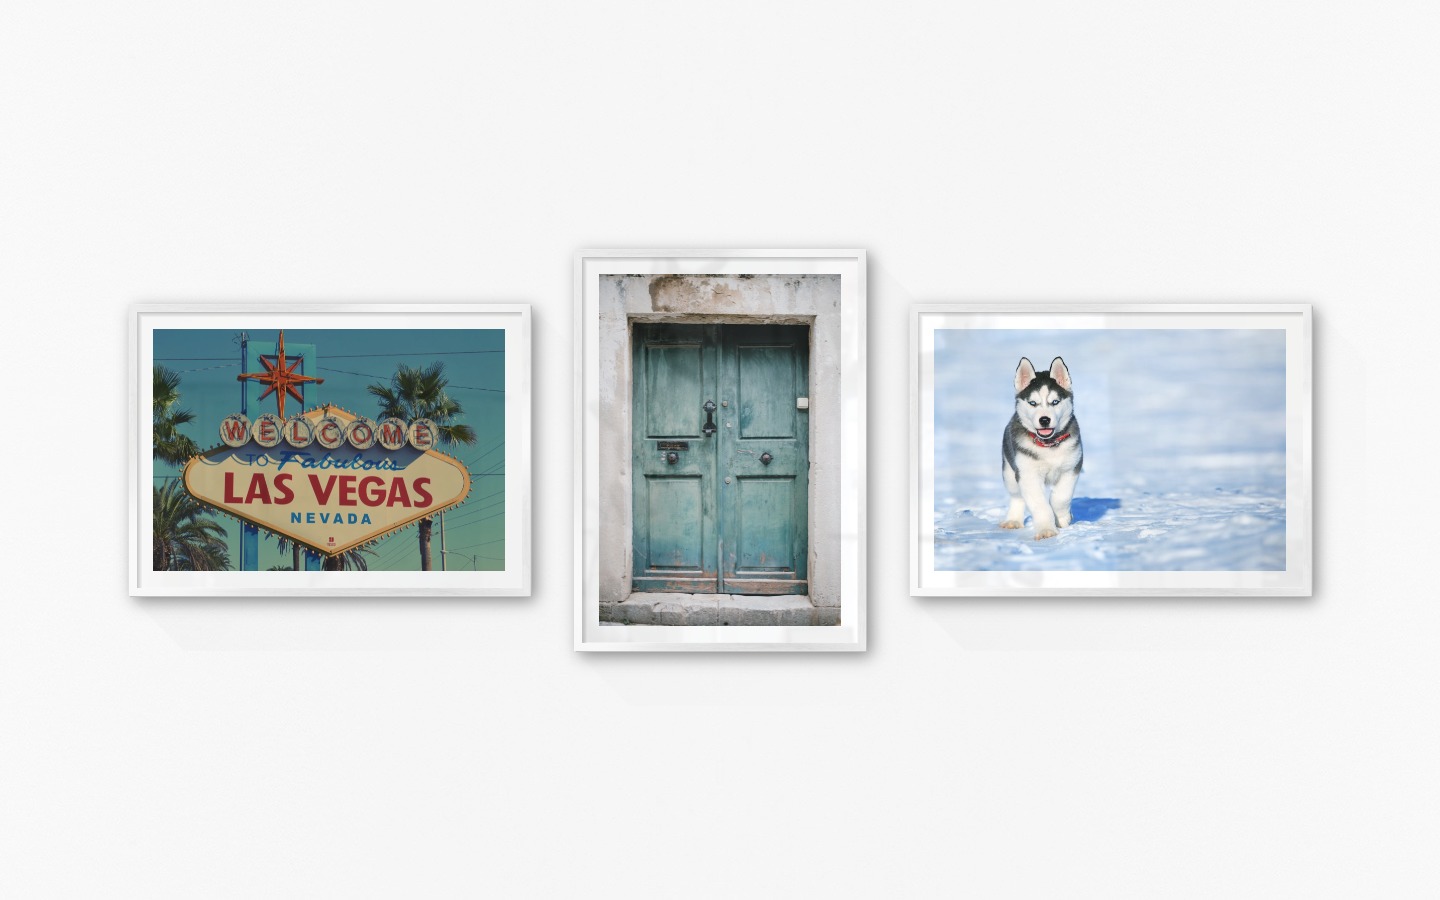 Gallery wall with picture frames in silver in sizes 50x70 with prints "Las Vegas sign", "Door" and "Husky"